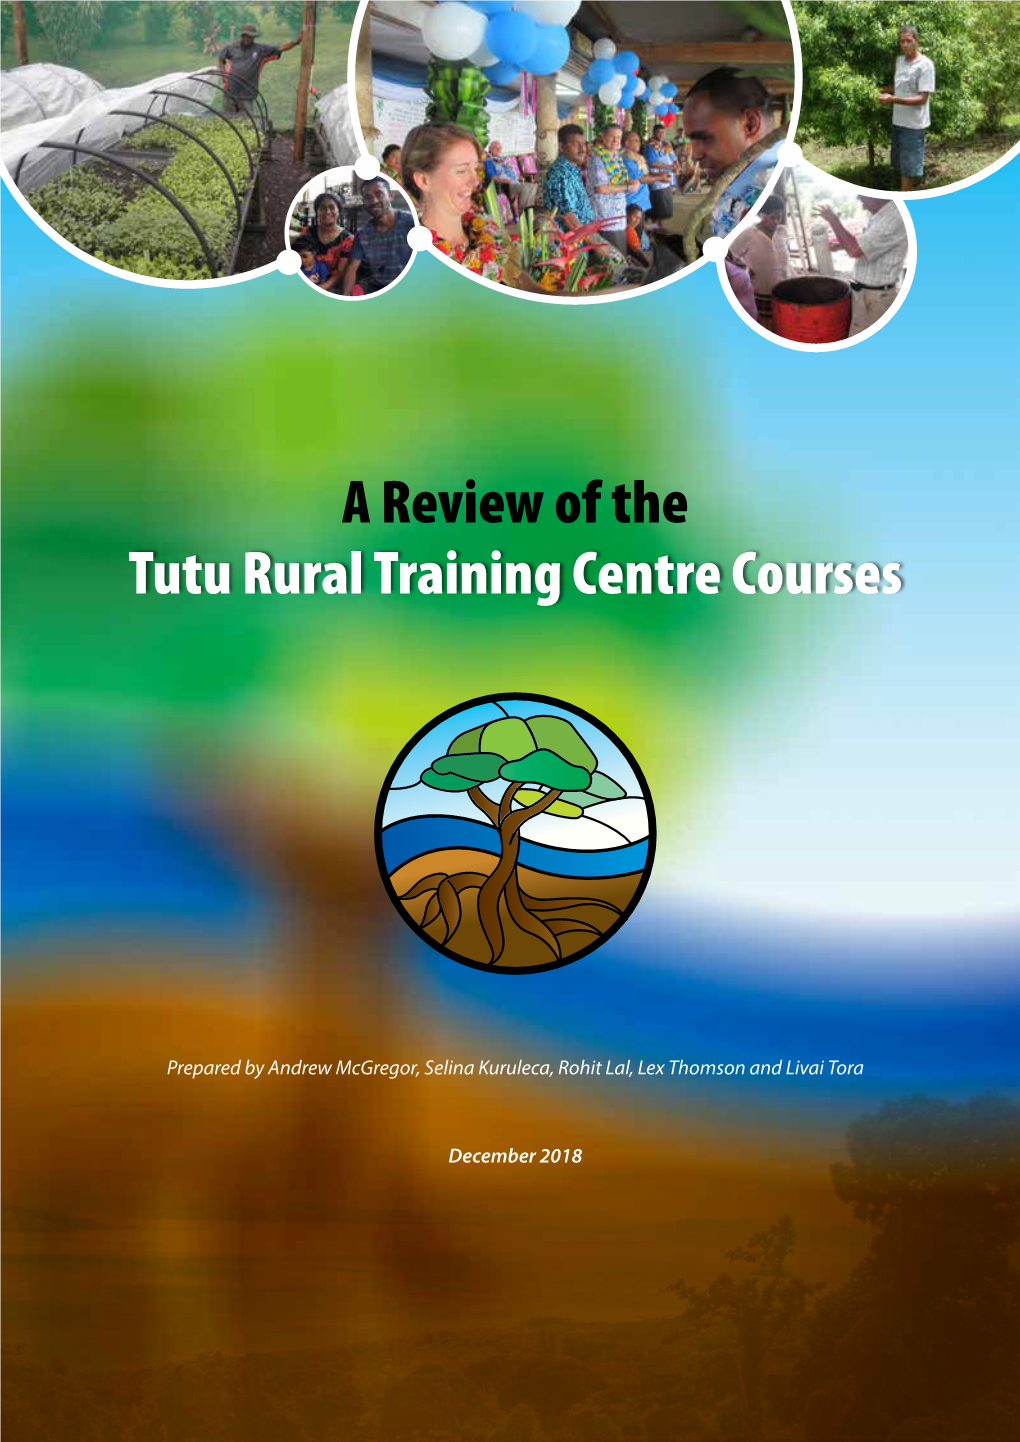 A Review of the Tutu Rural Training Centre Courses